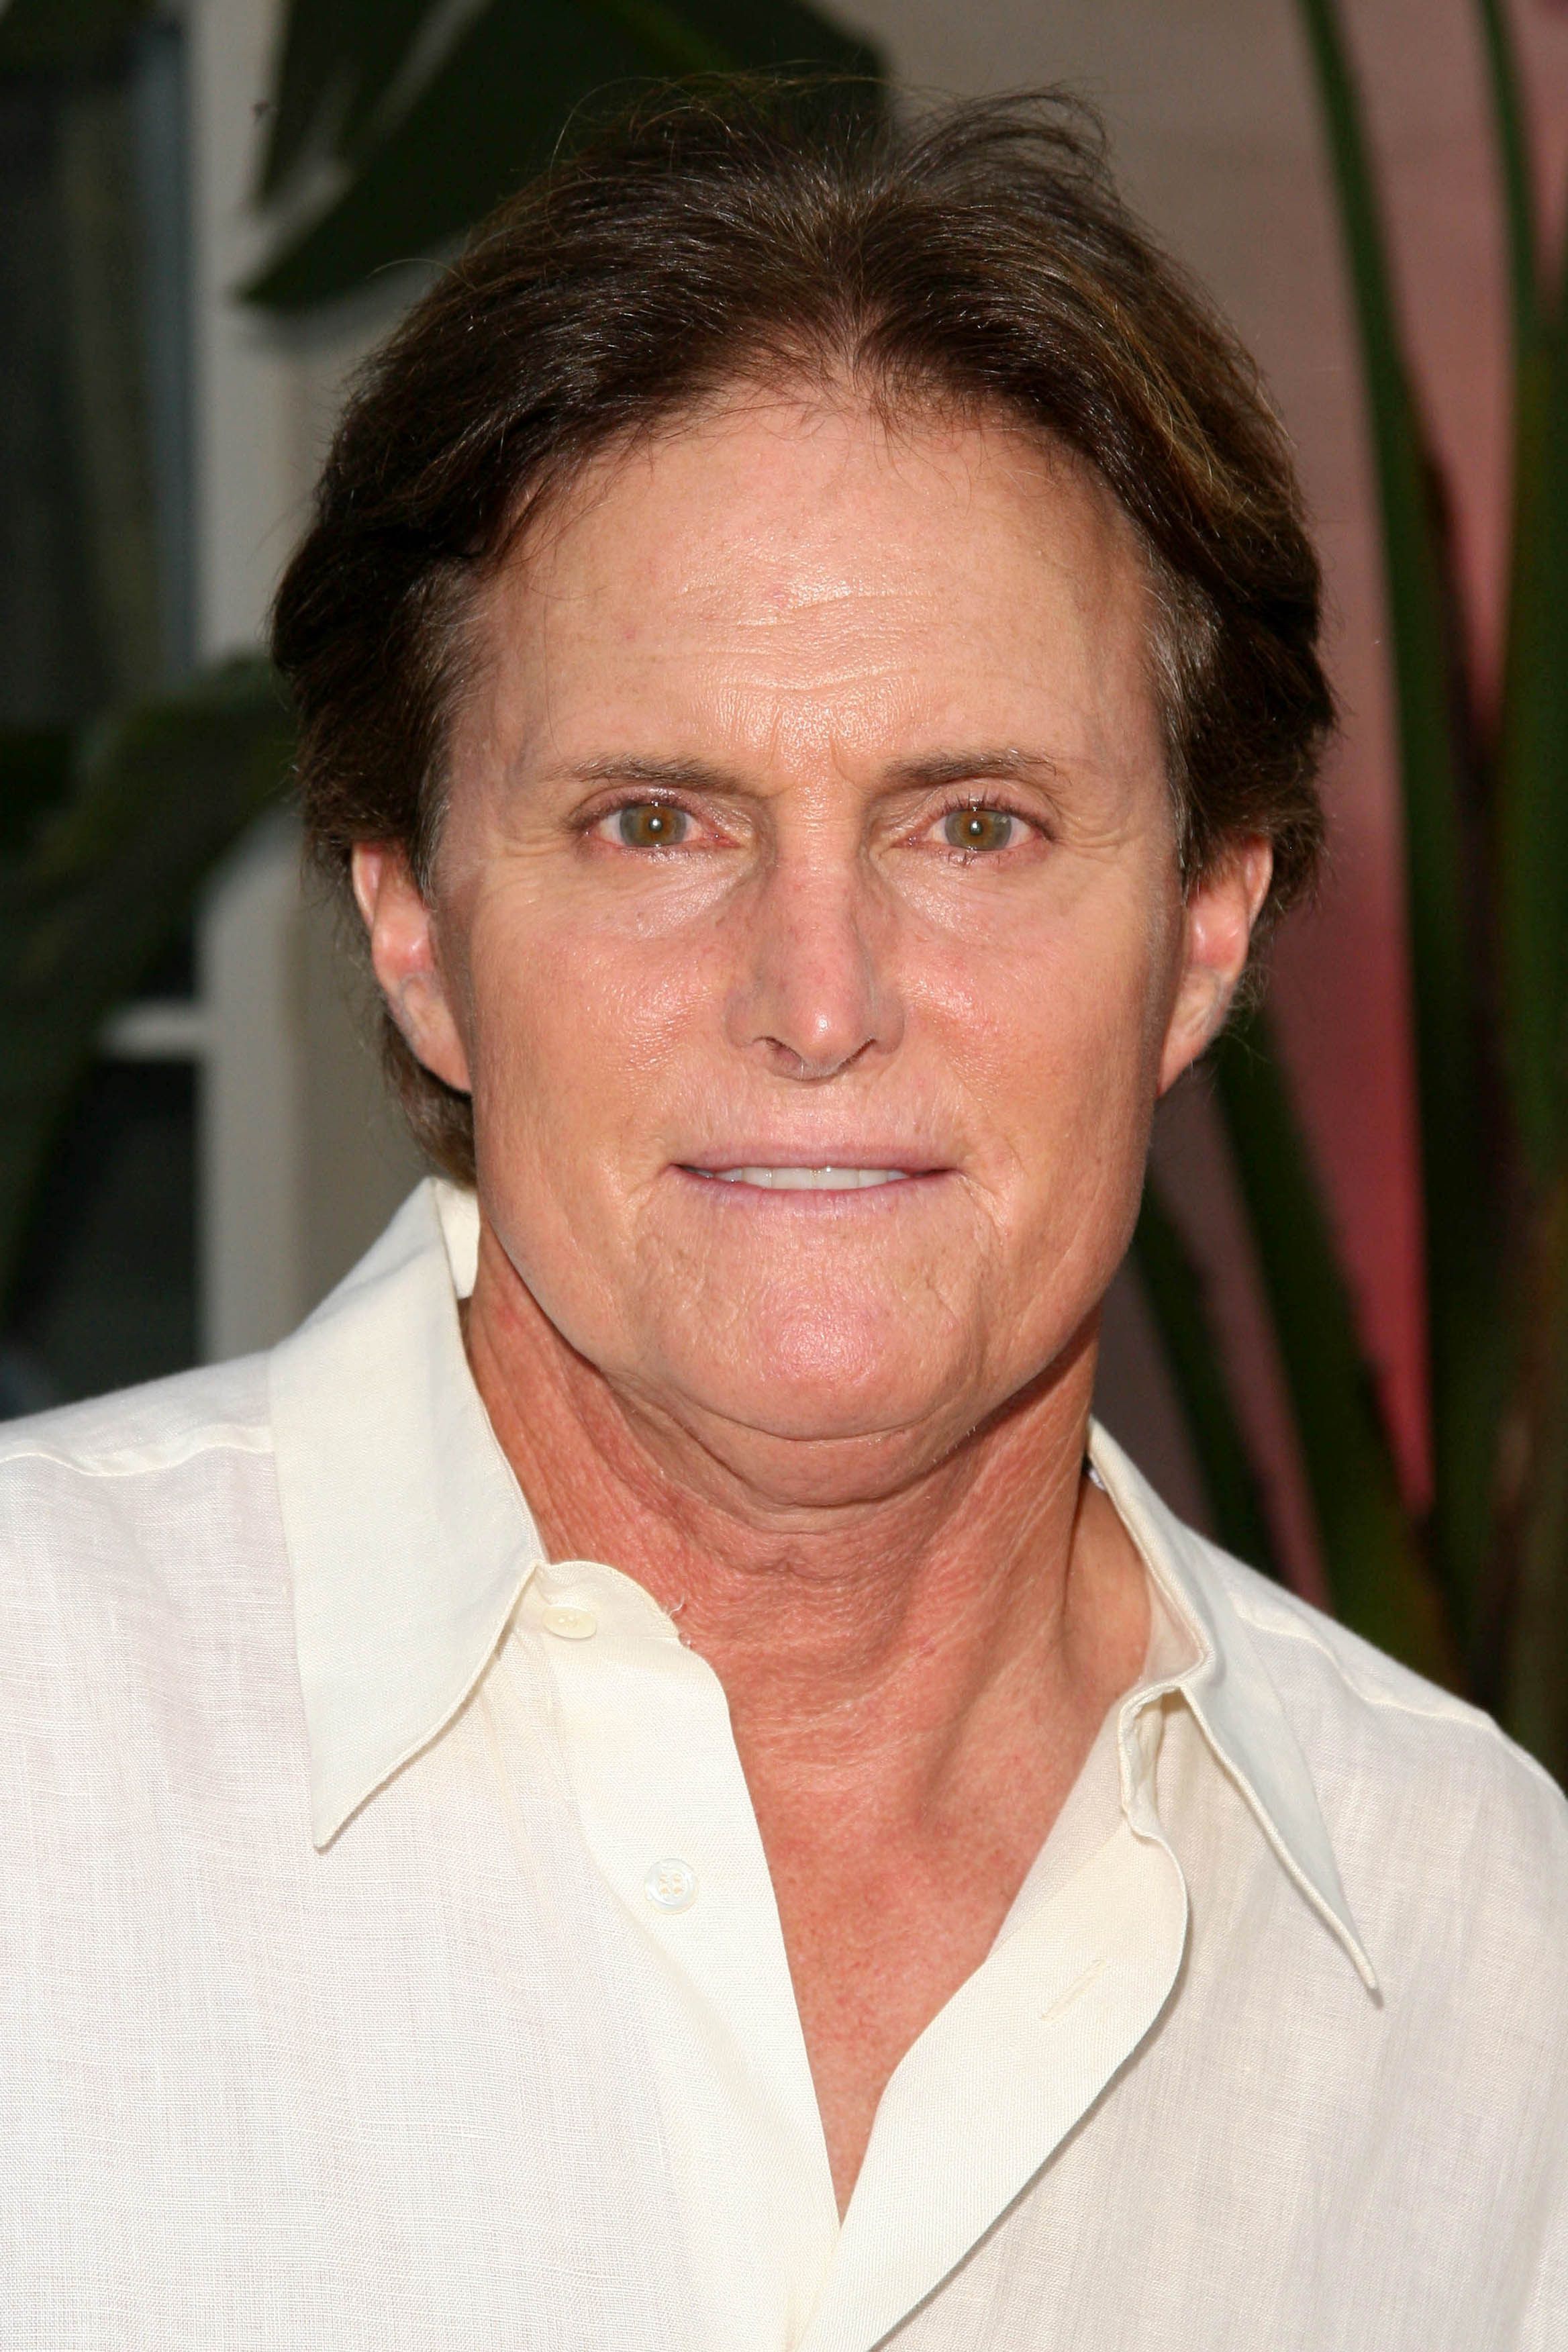 Bruce Jenner in a white button-down shirt.